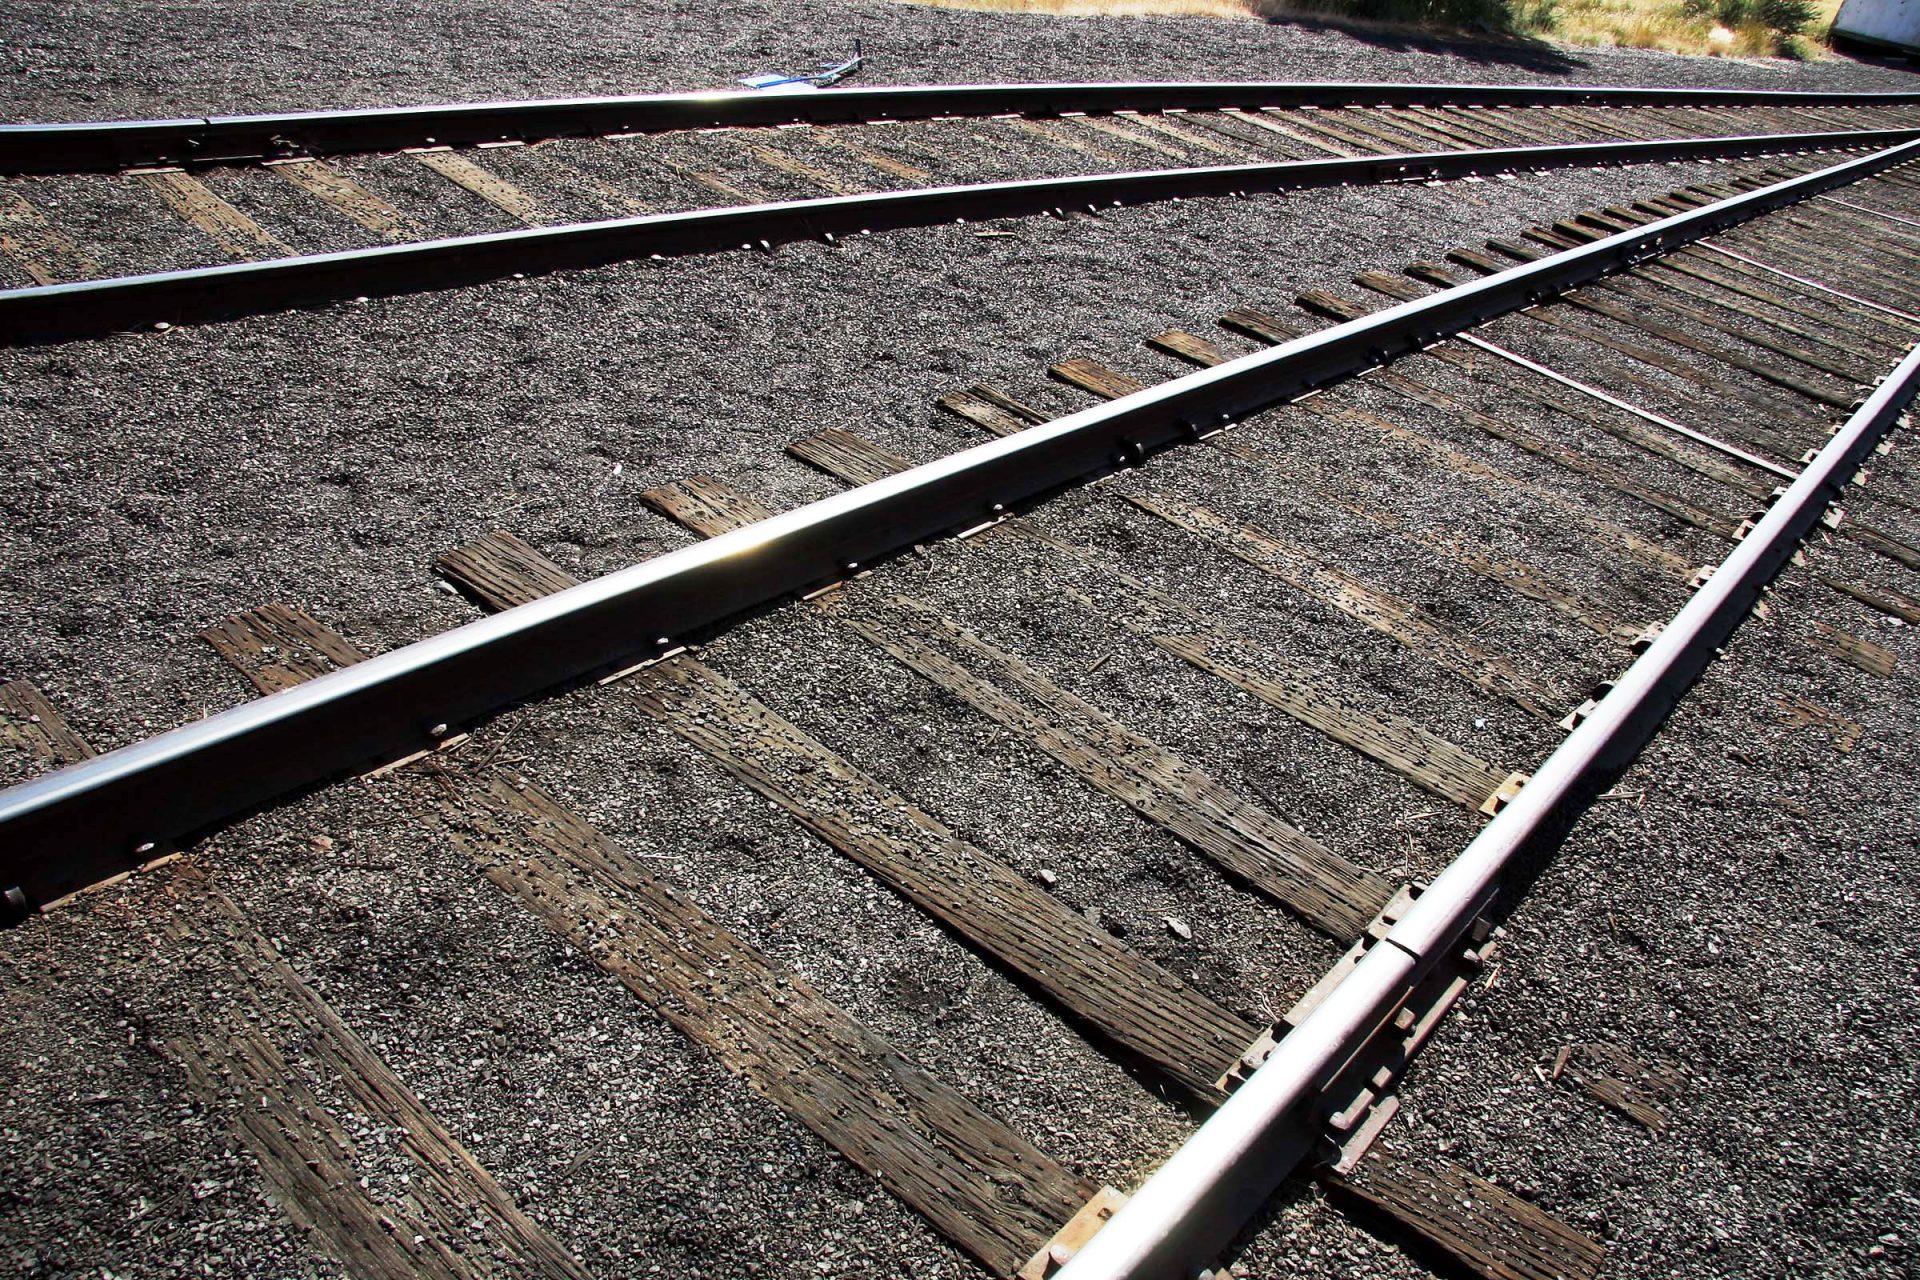 13 train cars derailed Wednesday near Mactier after two trains “made contact”